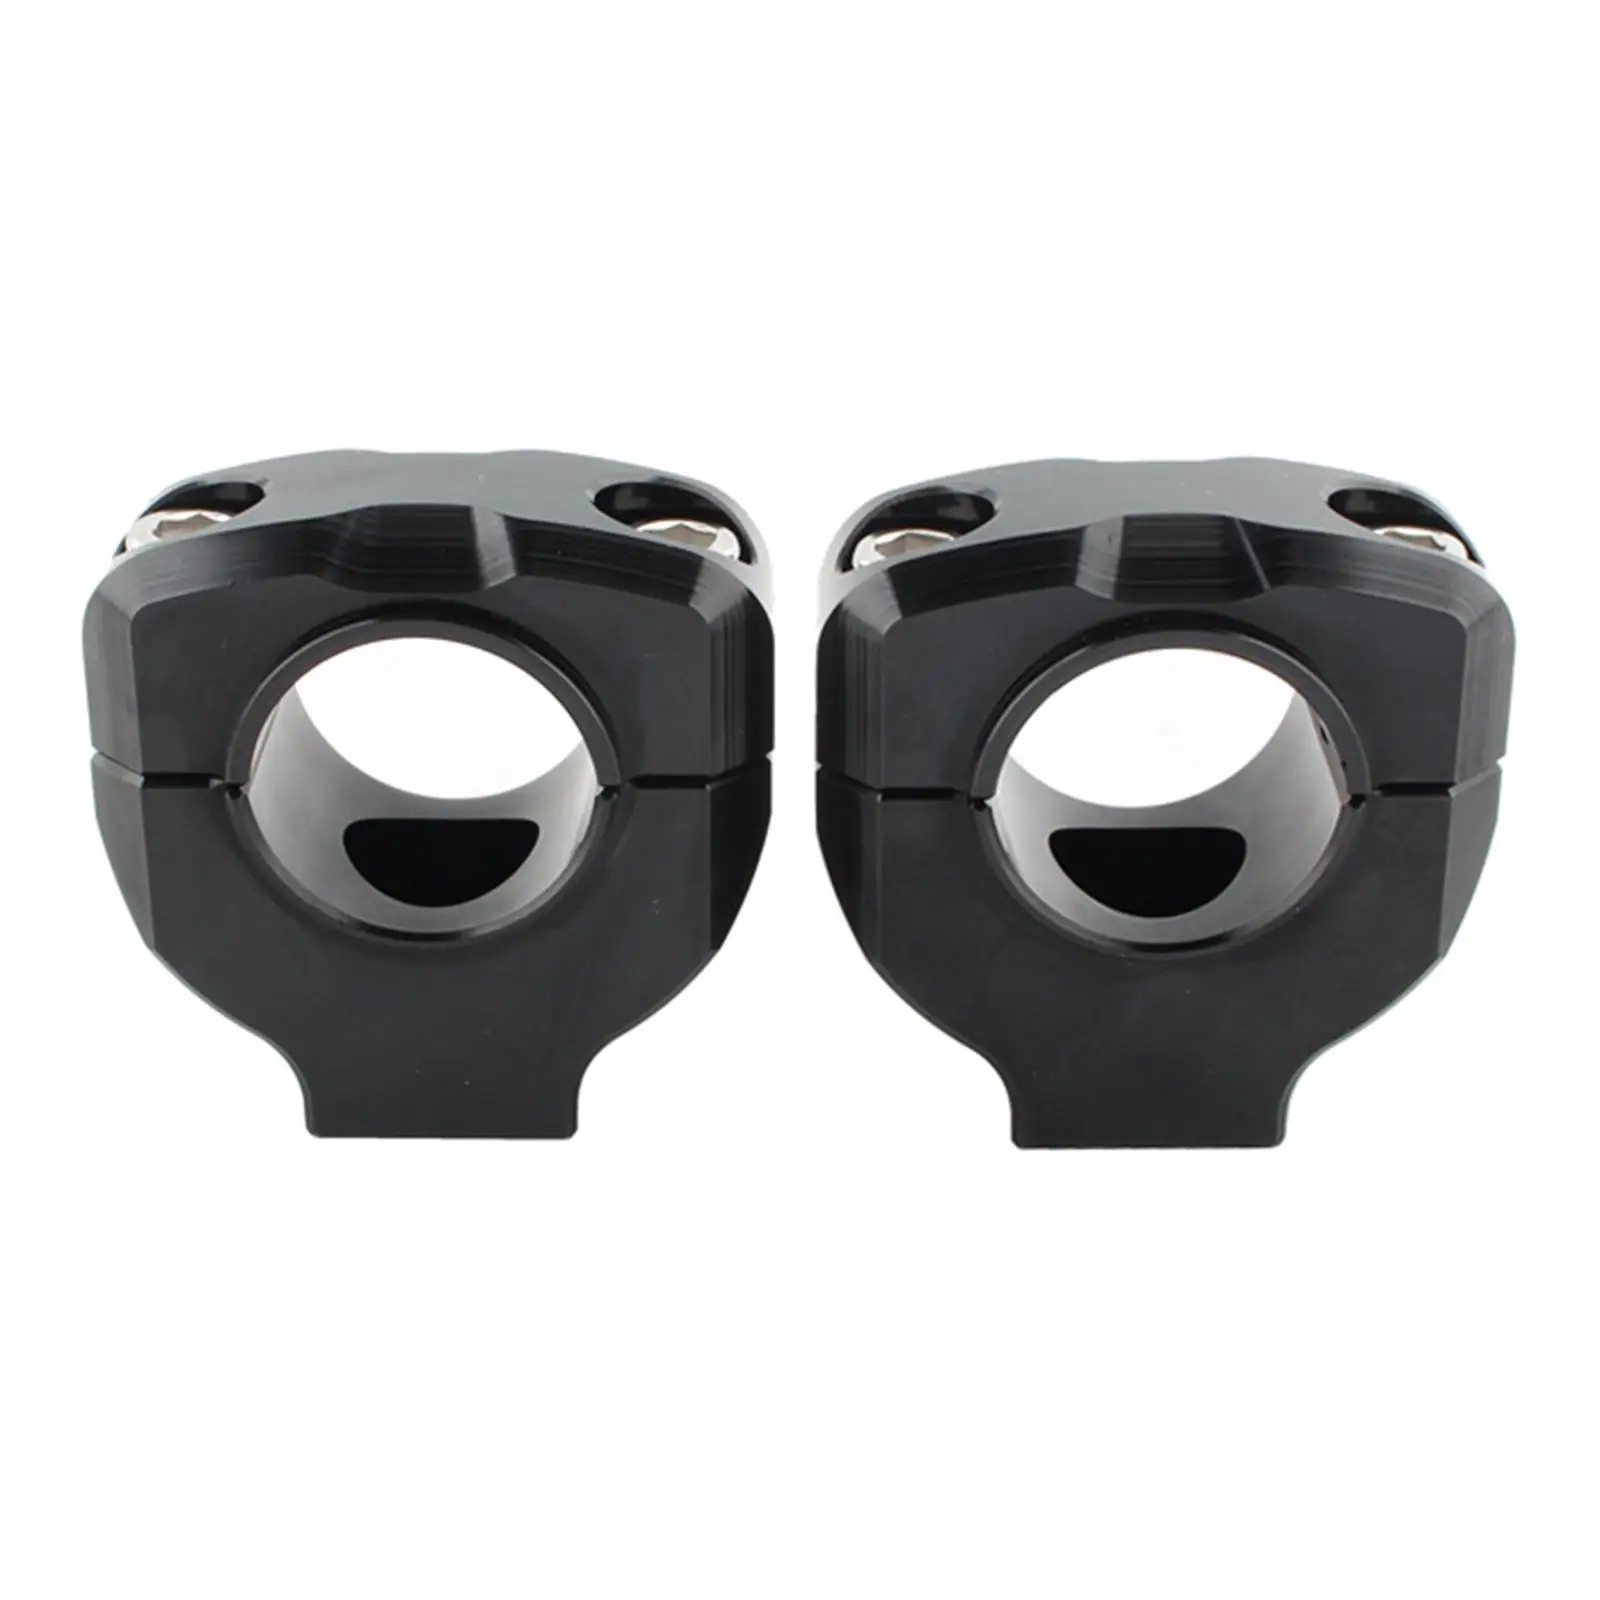 1 pair of universal motorcycle 28mm 1/8 inch handlebar riser clamp   Lifter - £16.76 GBP